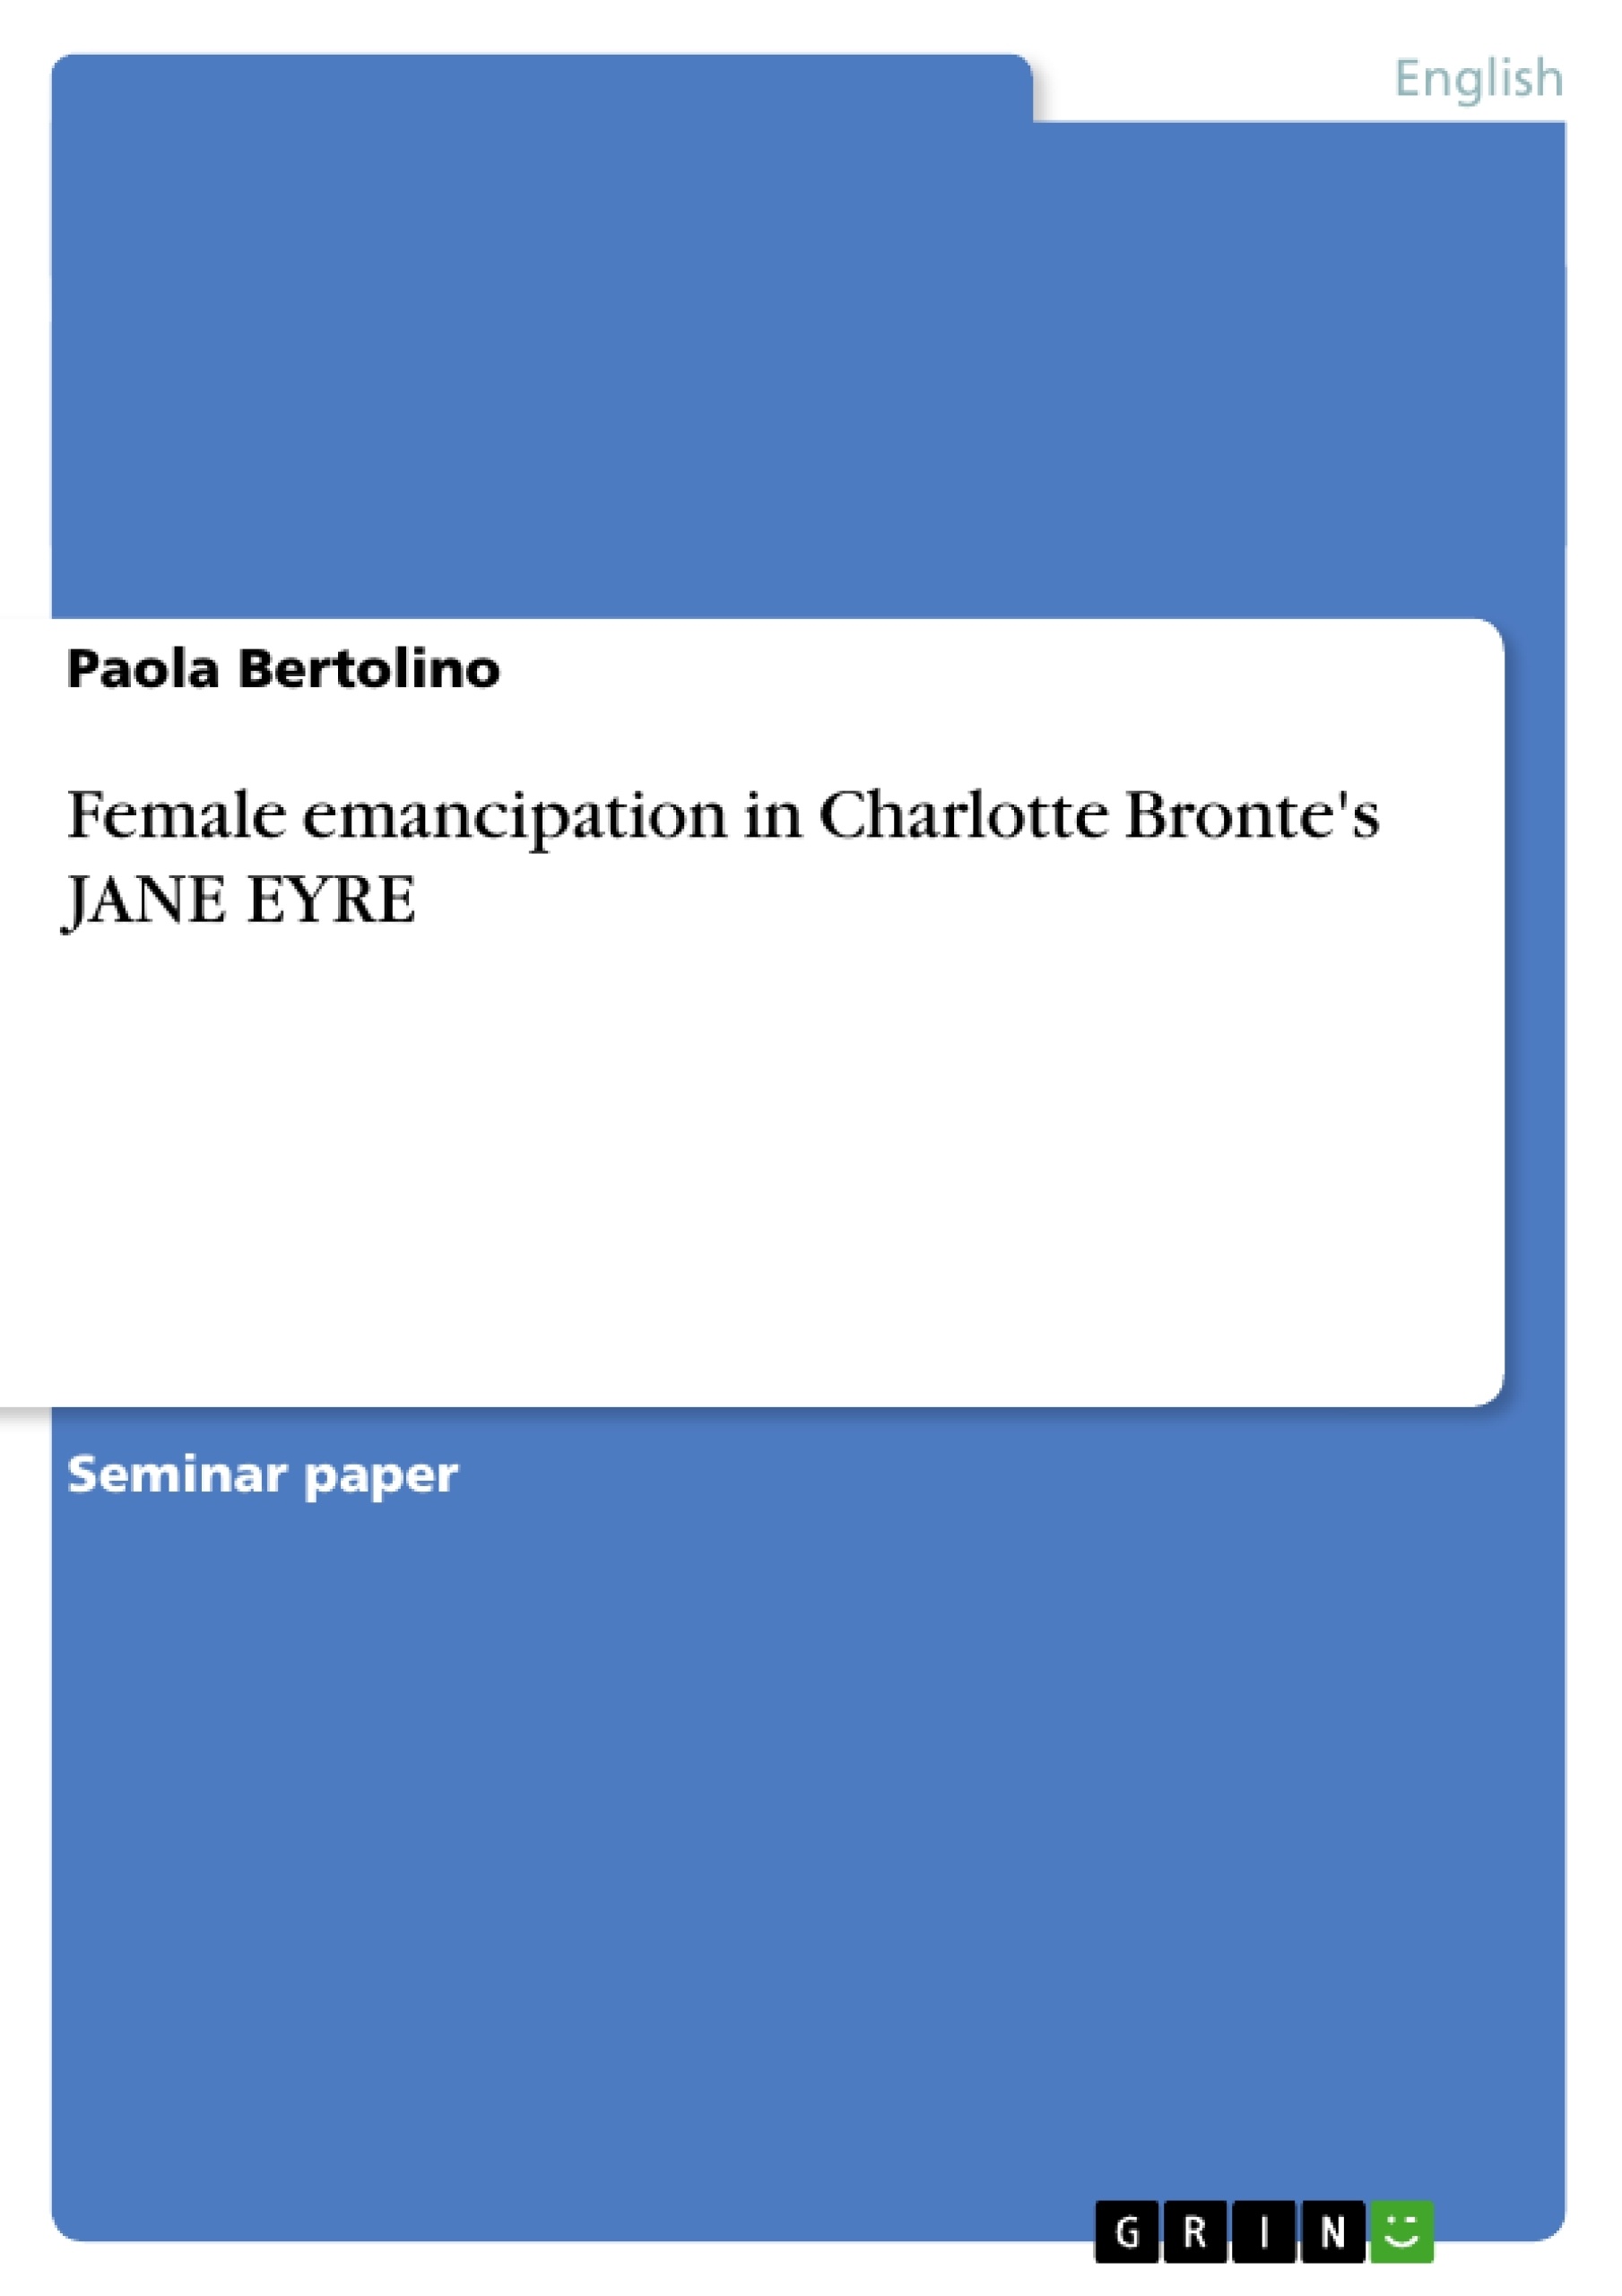 Title: Female emancipation in Charlotte Bronte's JANE EYRE